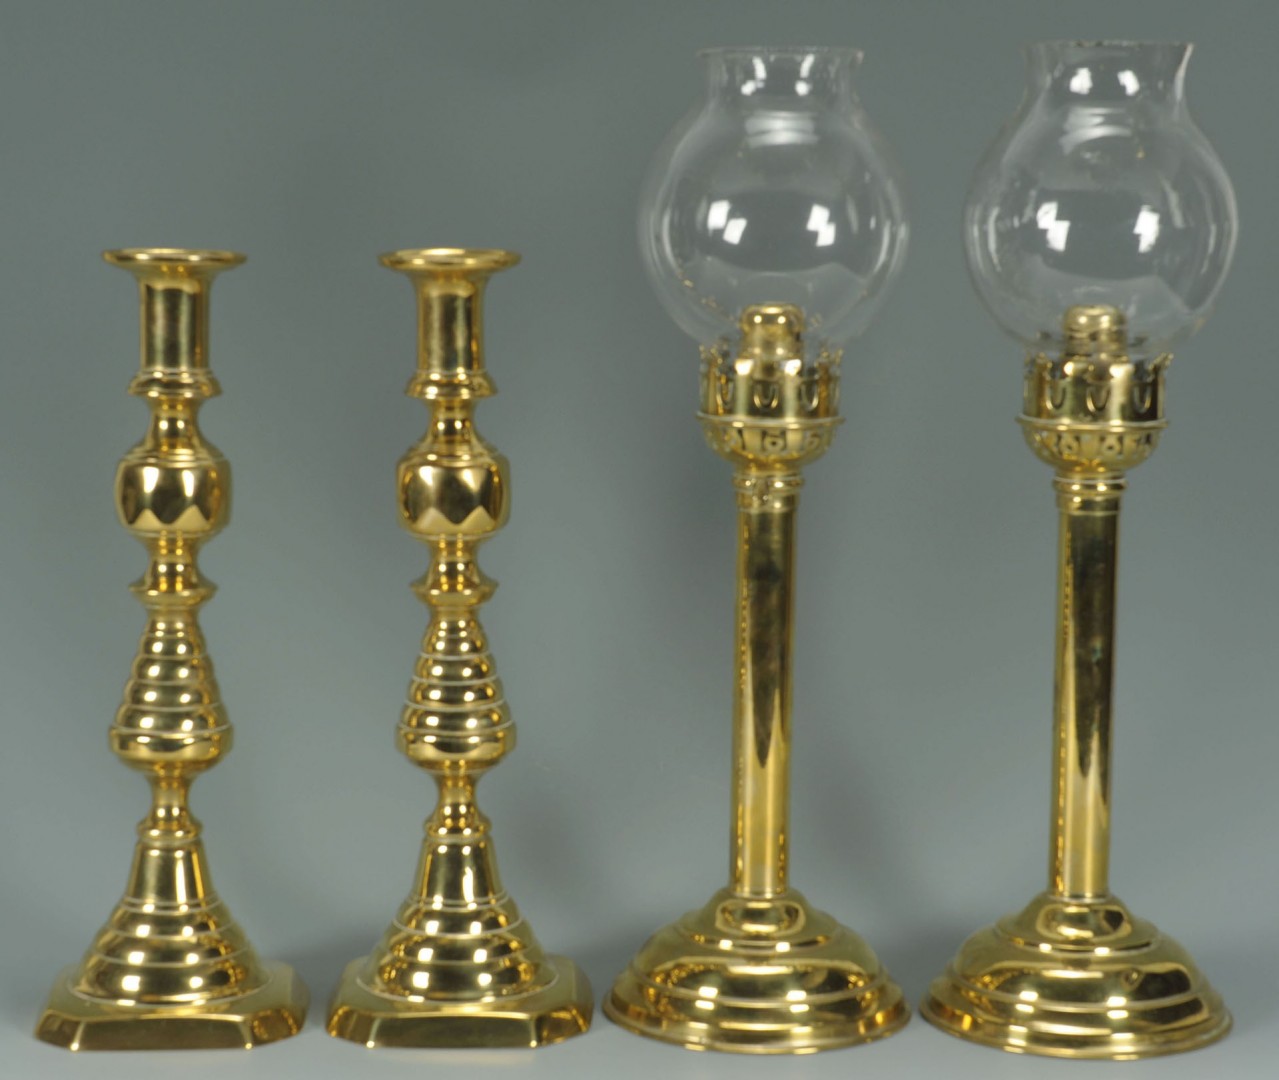 Lot 425: 4 Pairs Brass Candlesticks, 1 with shades, 8 total